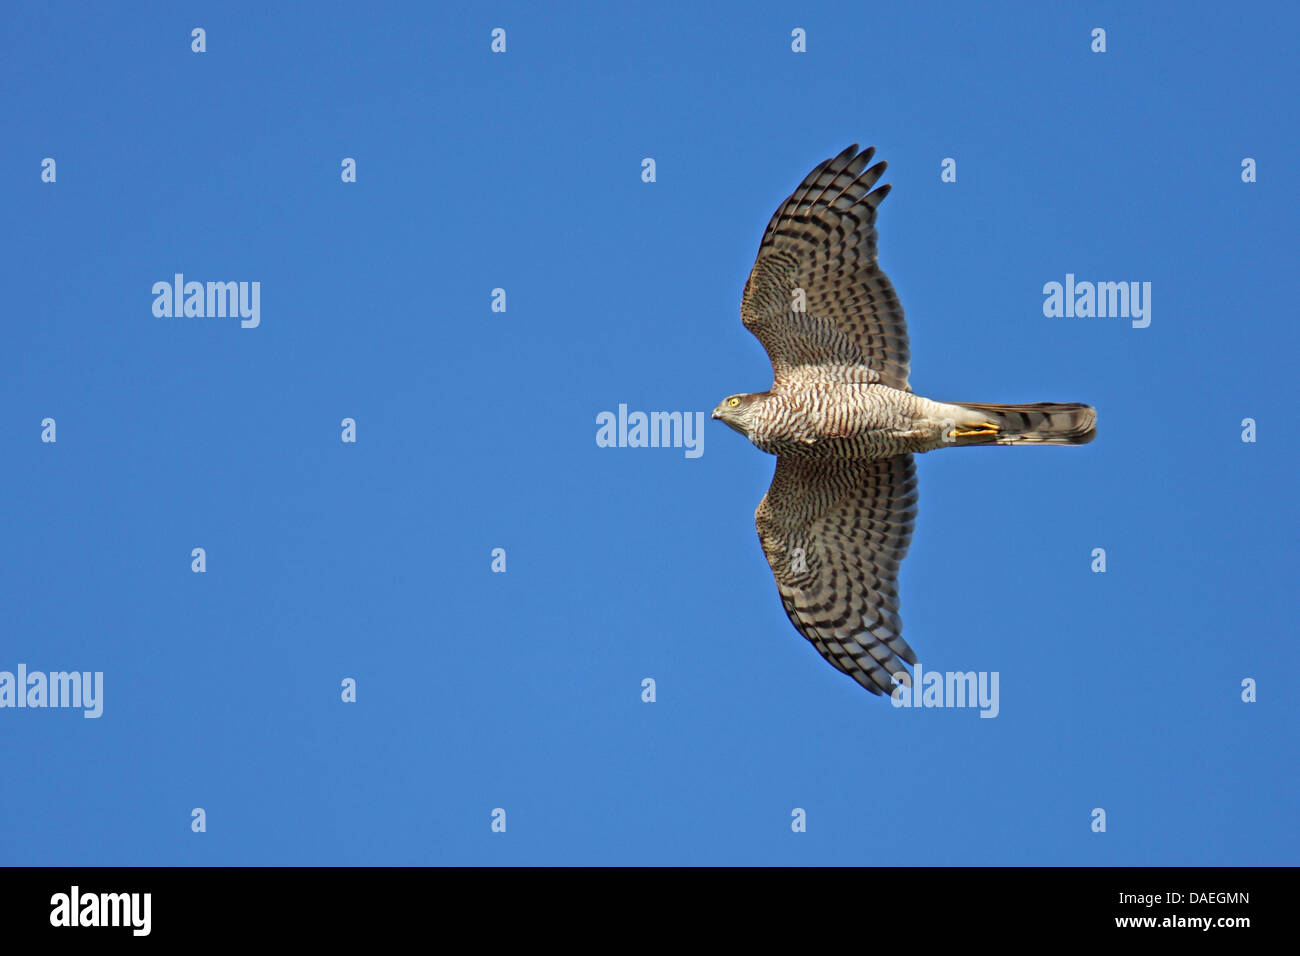 northern sparrow hawk (Accipiter nisus), flying female, Sweden, Falsterbo Stock Photo